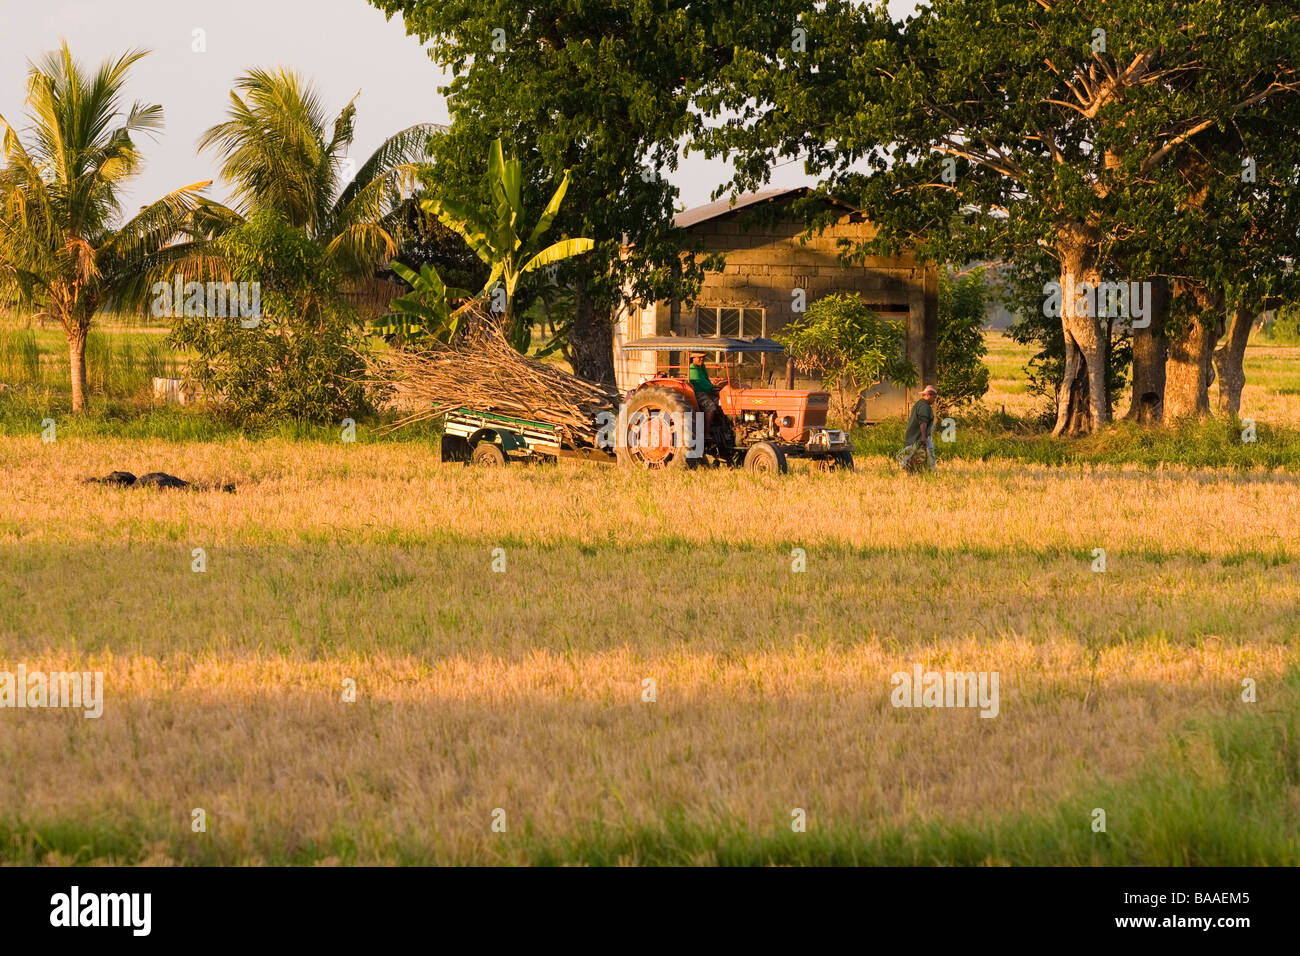 An old tractor in a rice farm in the Philippines Stock Photo